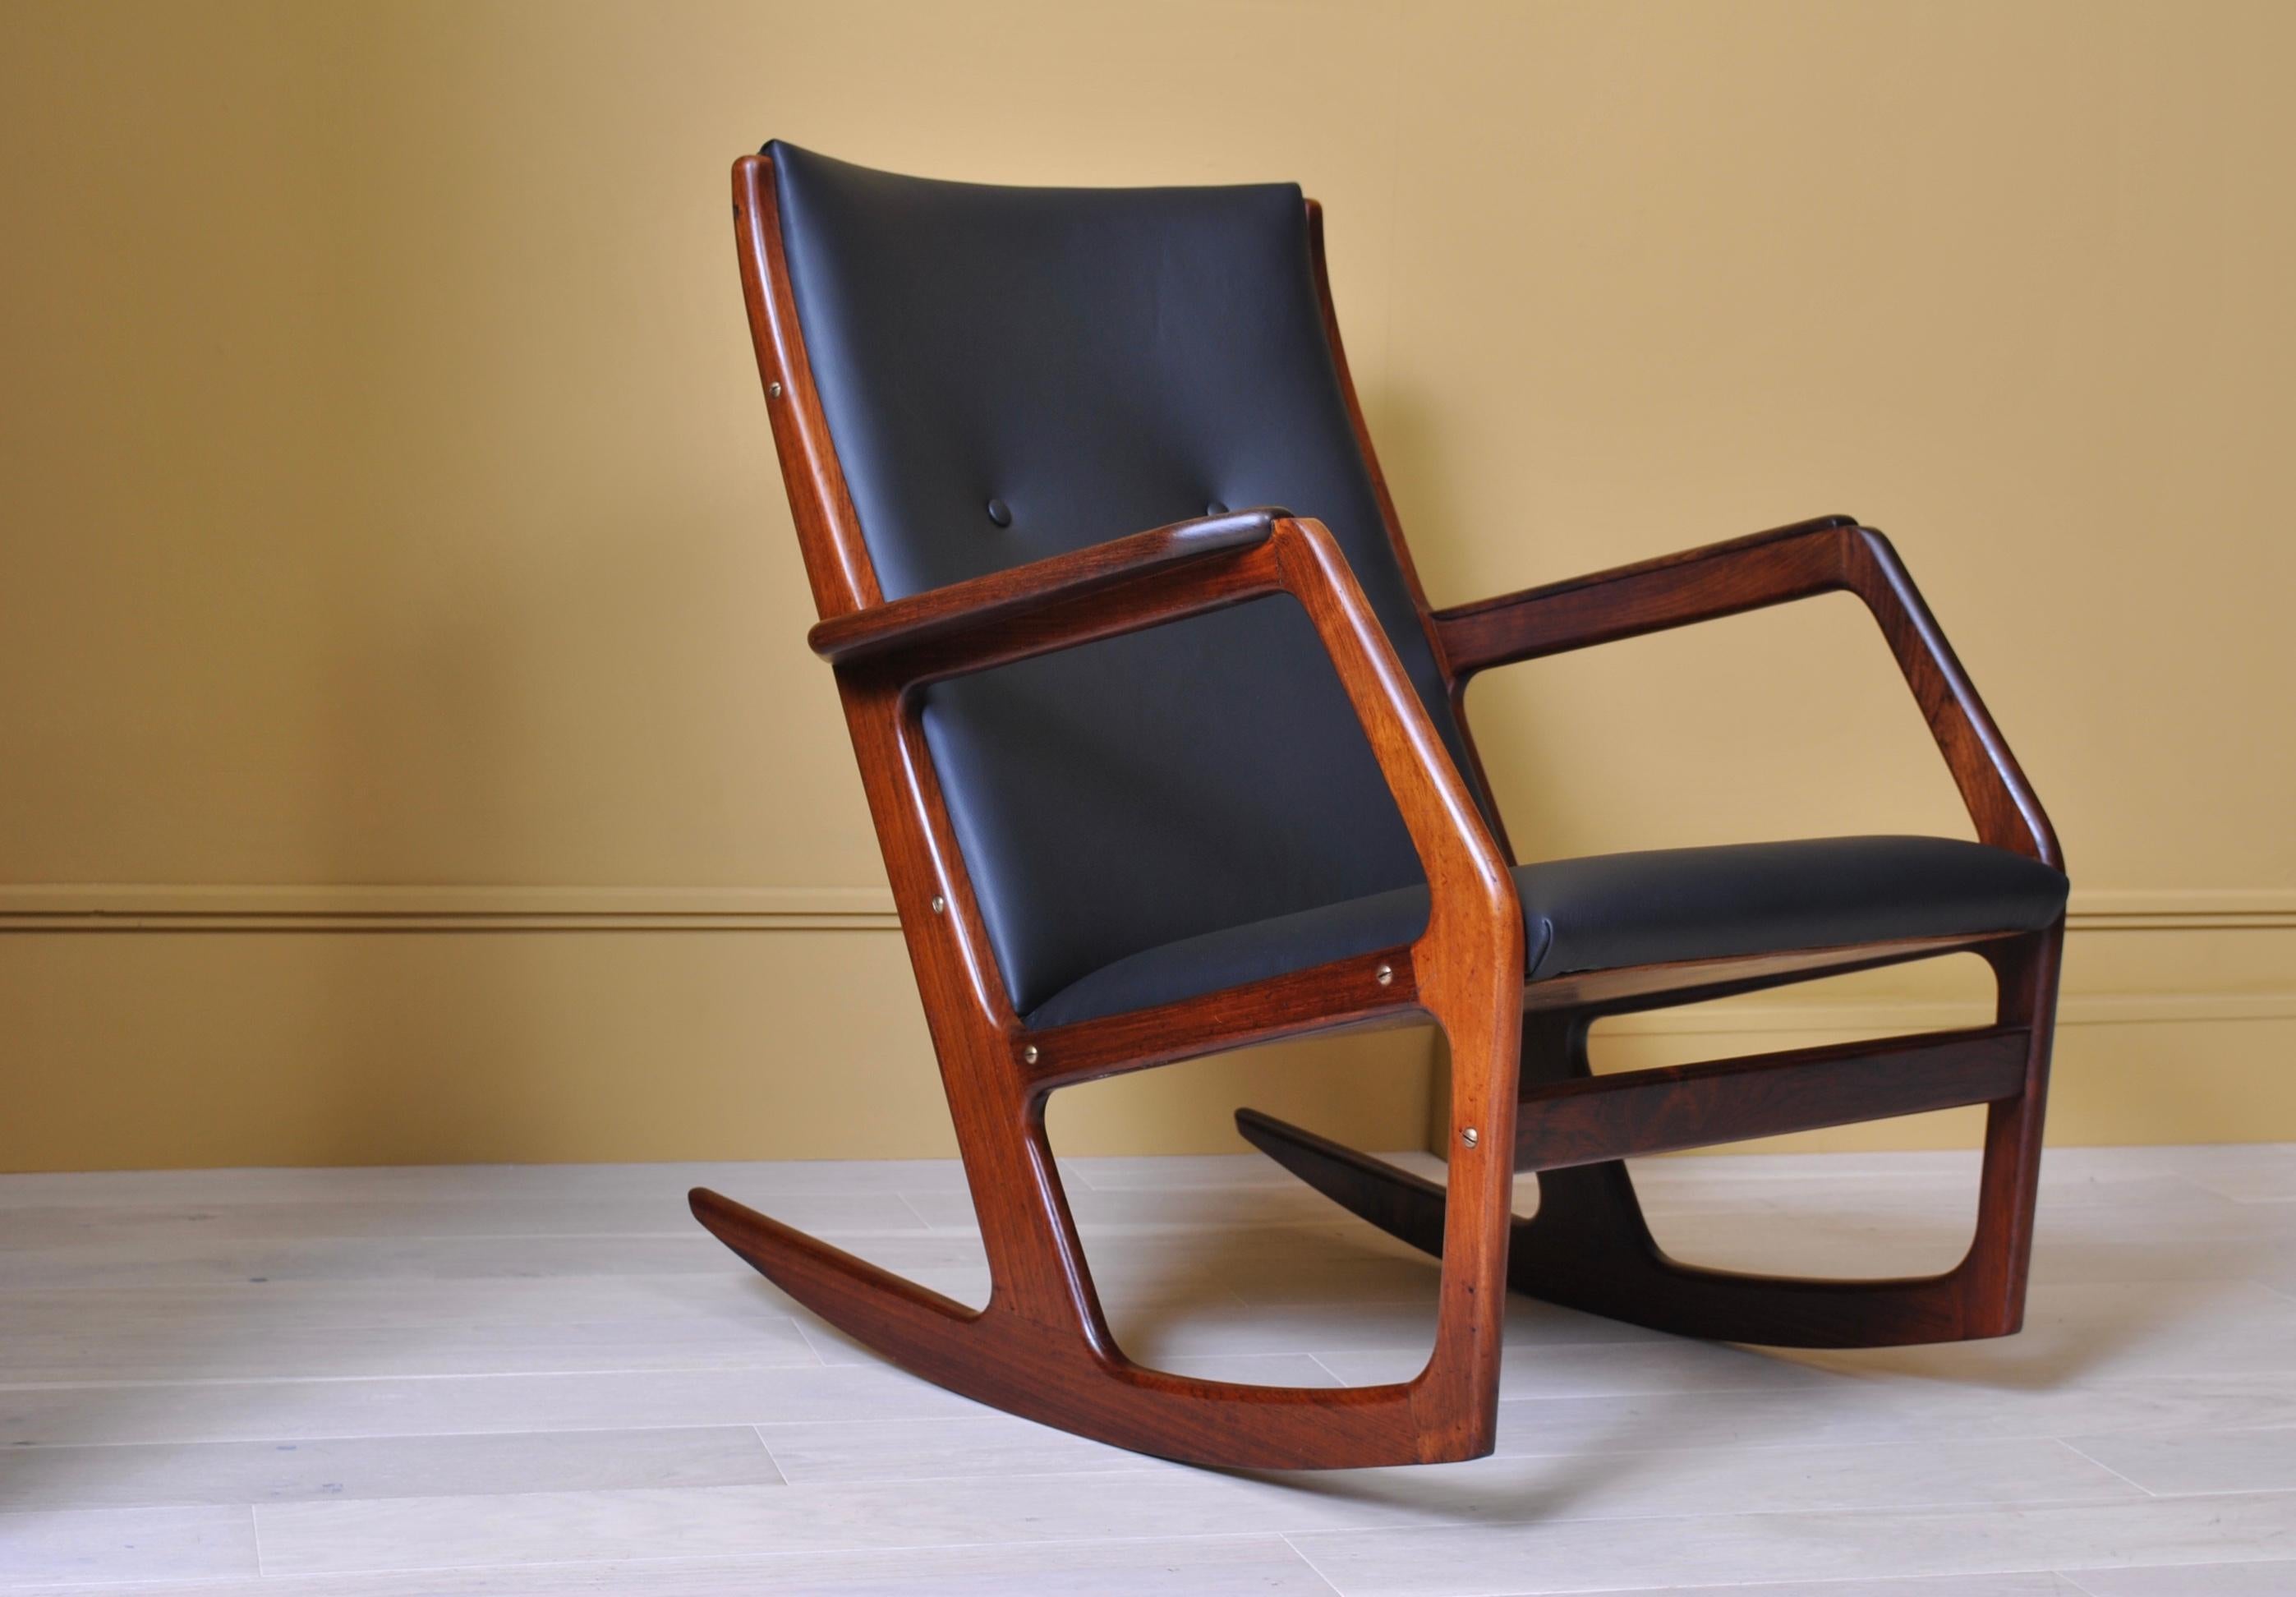 A very rarely seen design by Søren Georg Jensen - particularly in glorious rosewood. This rocking chair has been fully reupholstered to the original specifications in fine black leather. The rosewood frame has been thoroughly cleaned and polished. A